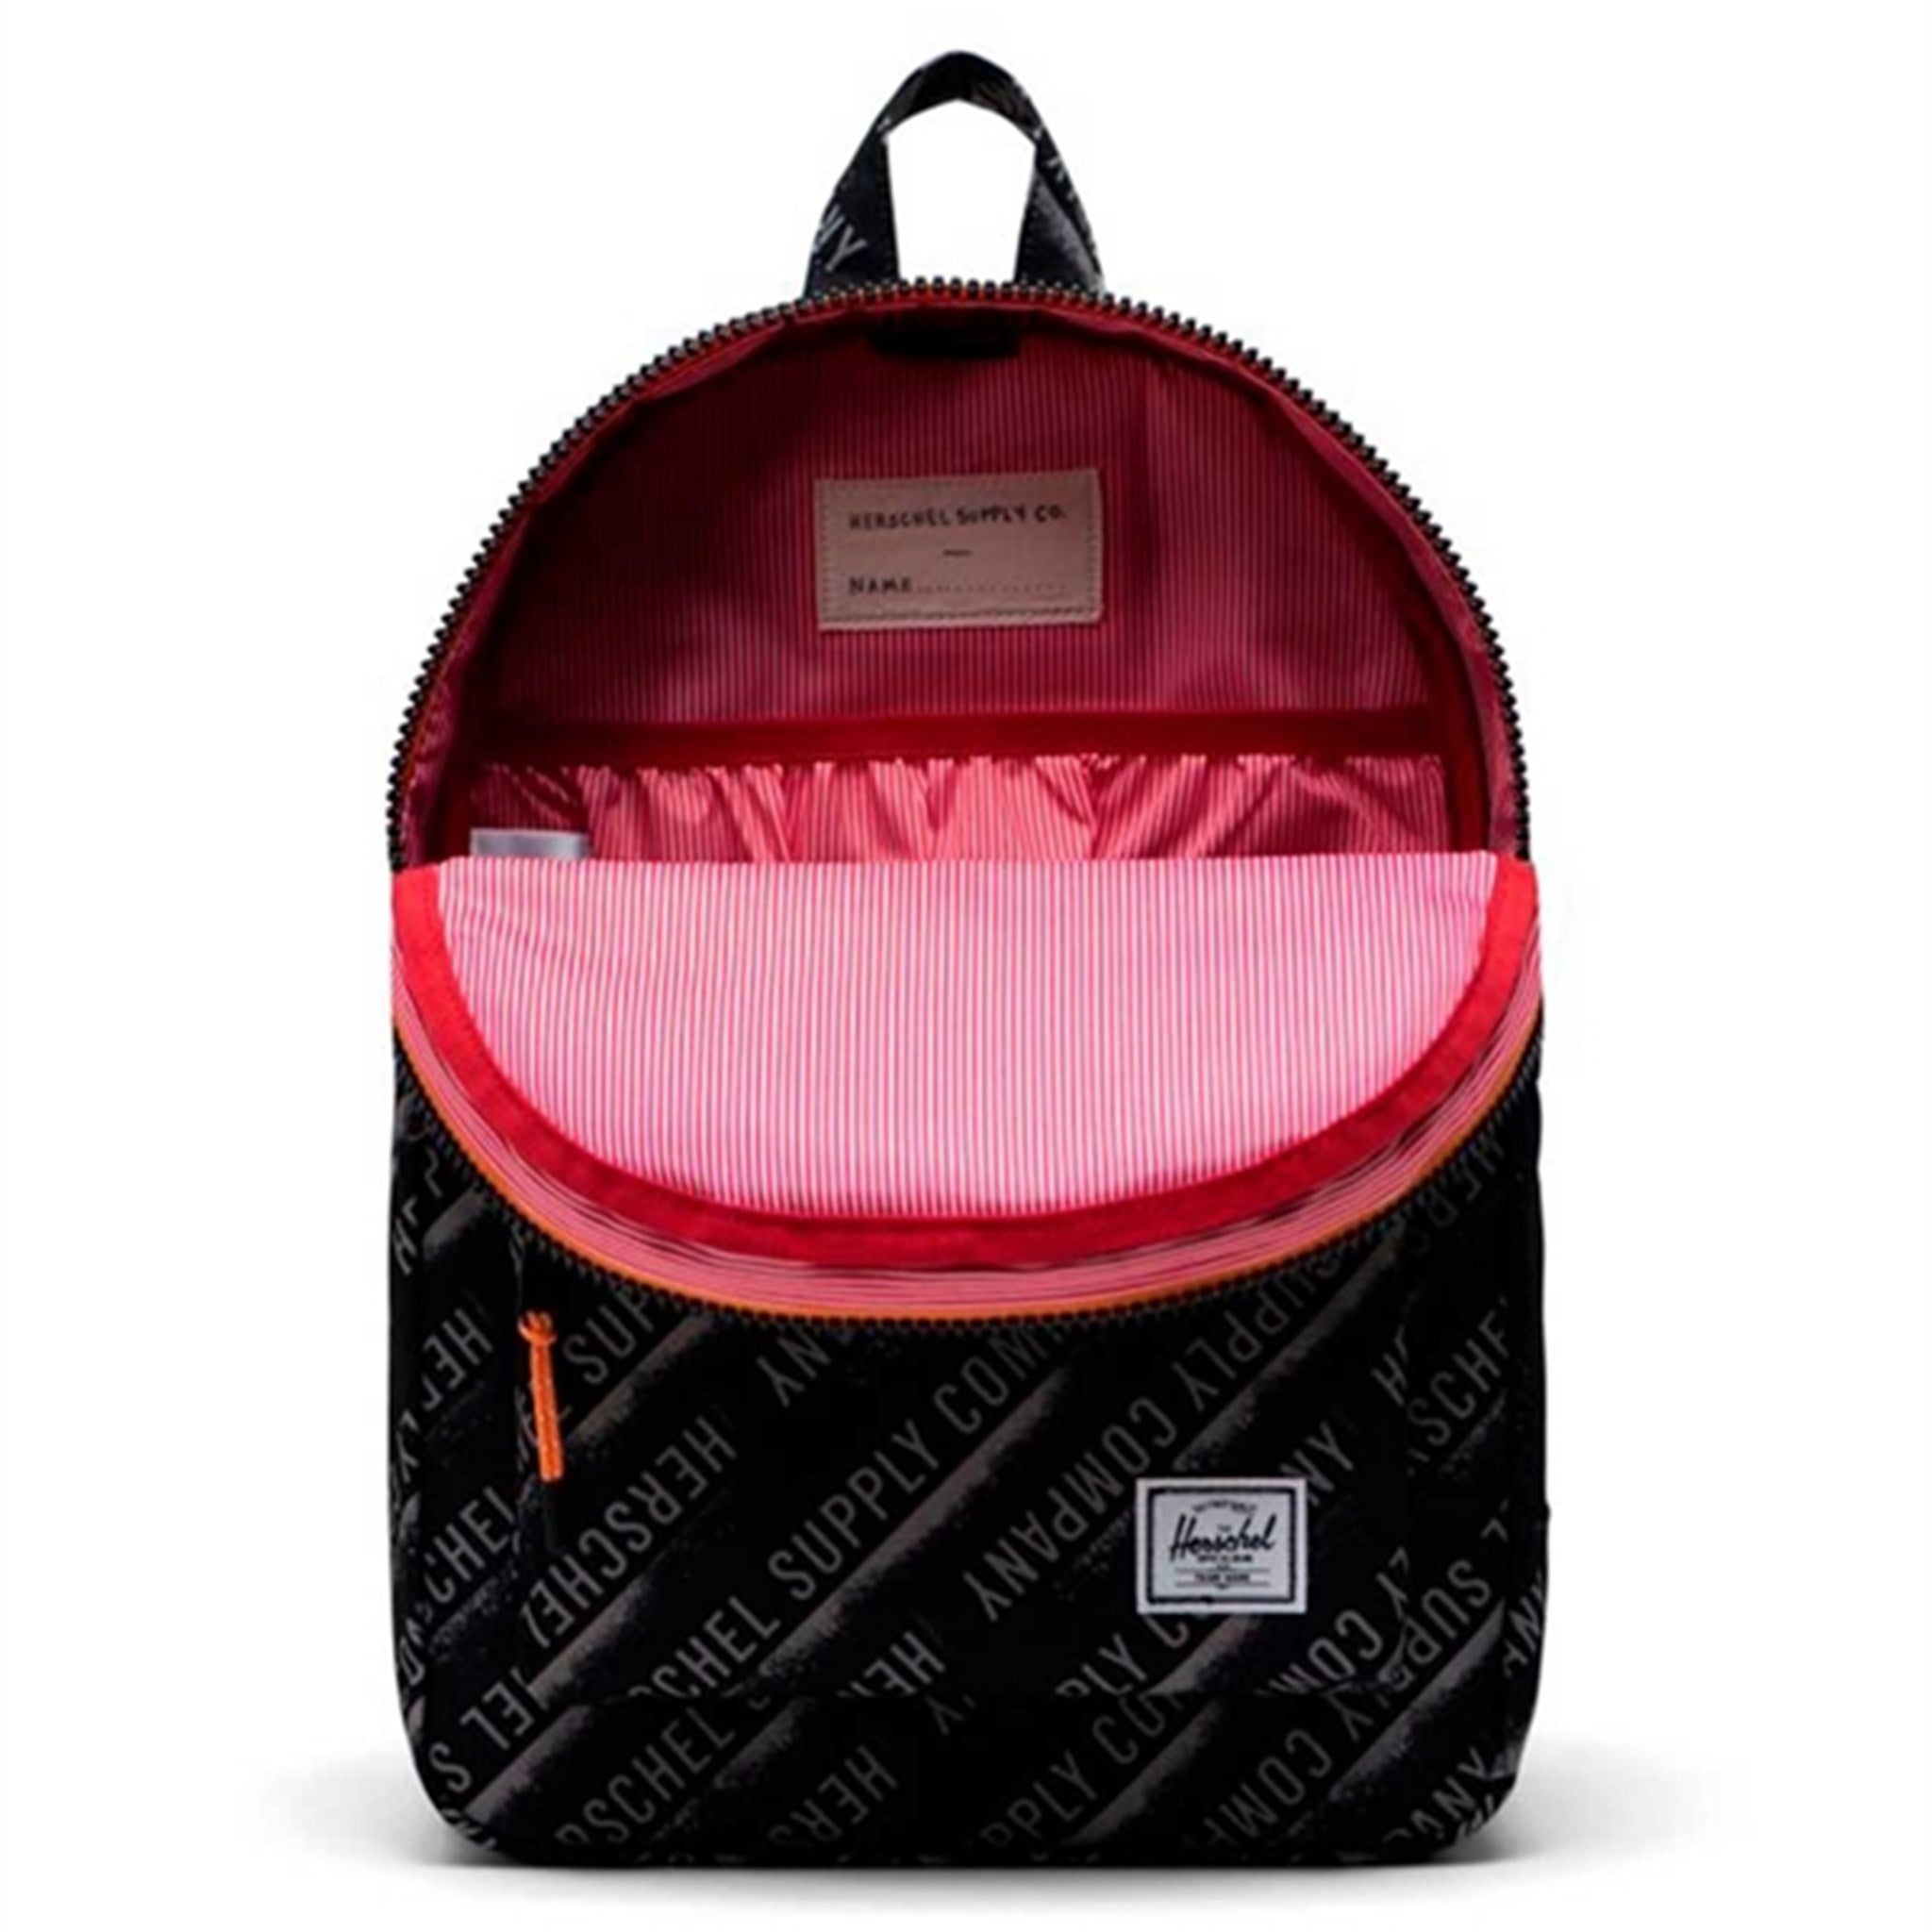 Herschel Backpack Youth Stencil Roll Call/Orange Popsicle 2